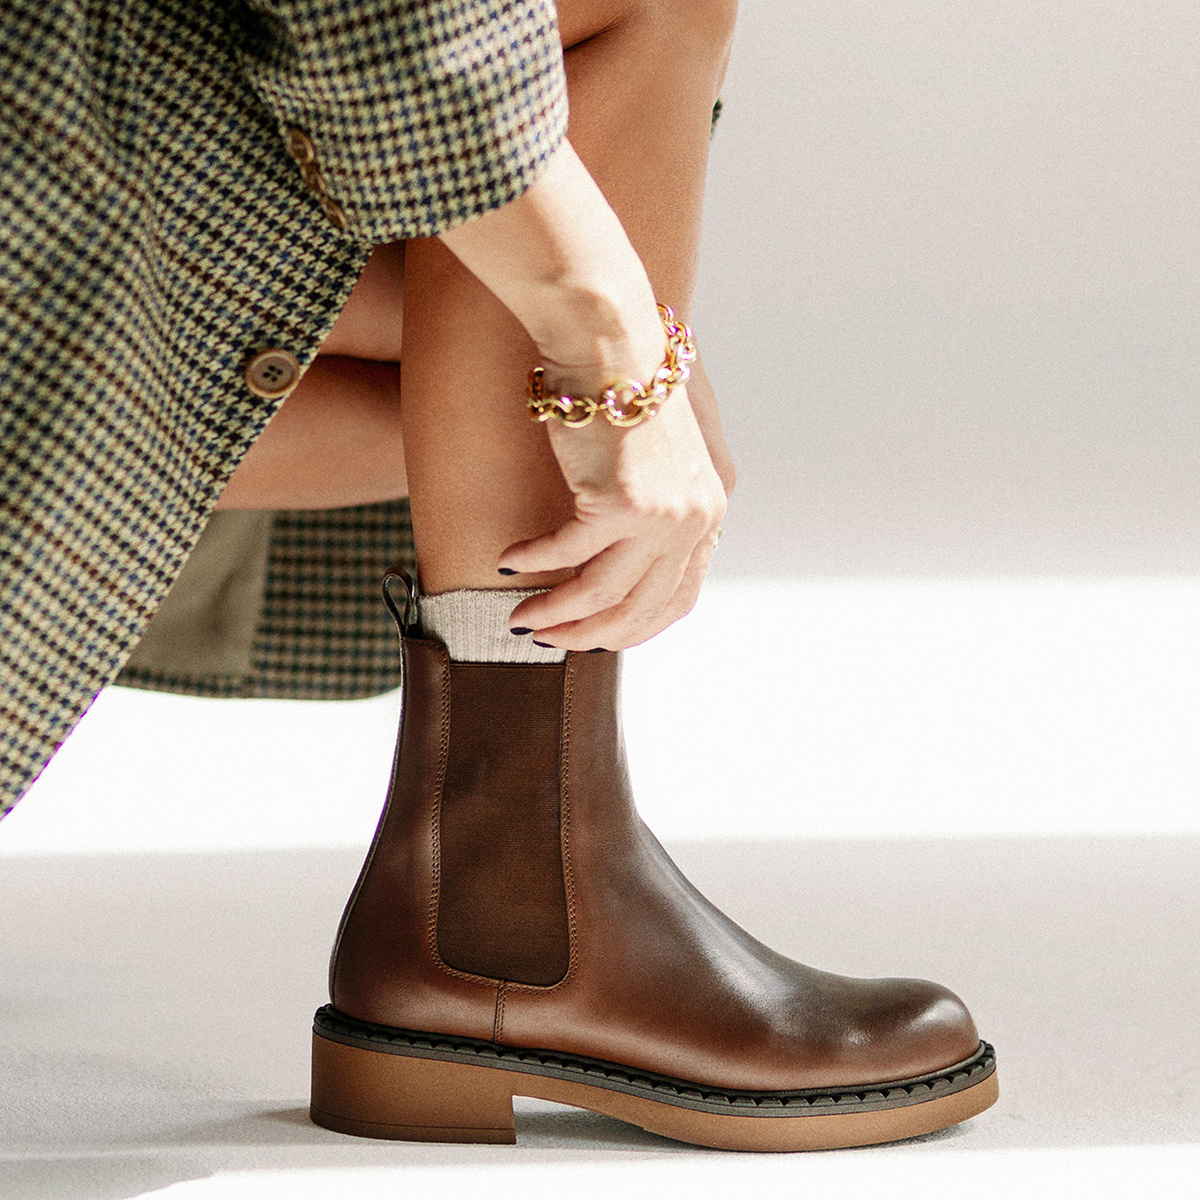 Brown Chelsea boots with a thicker sole